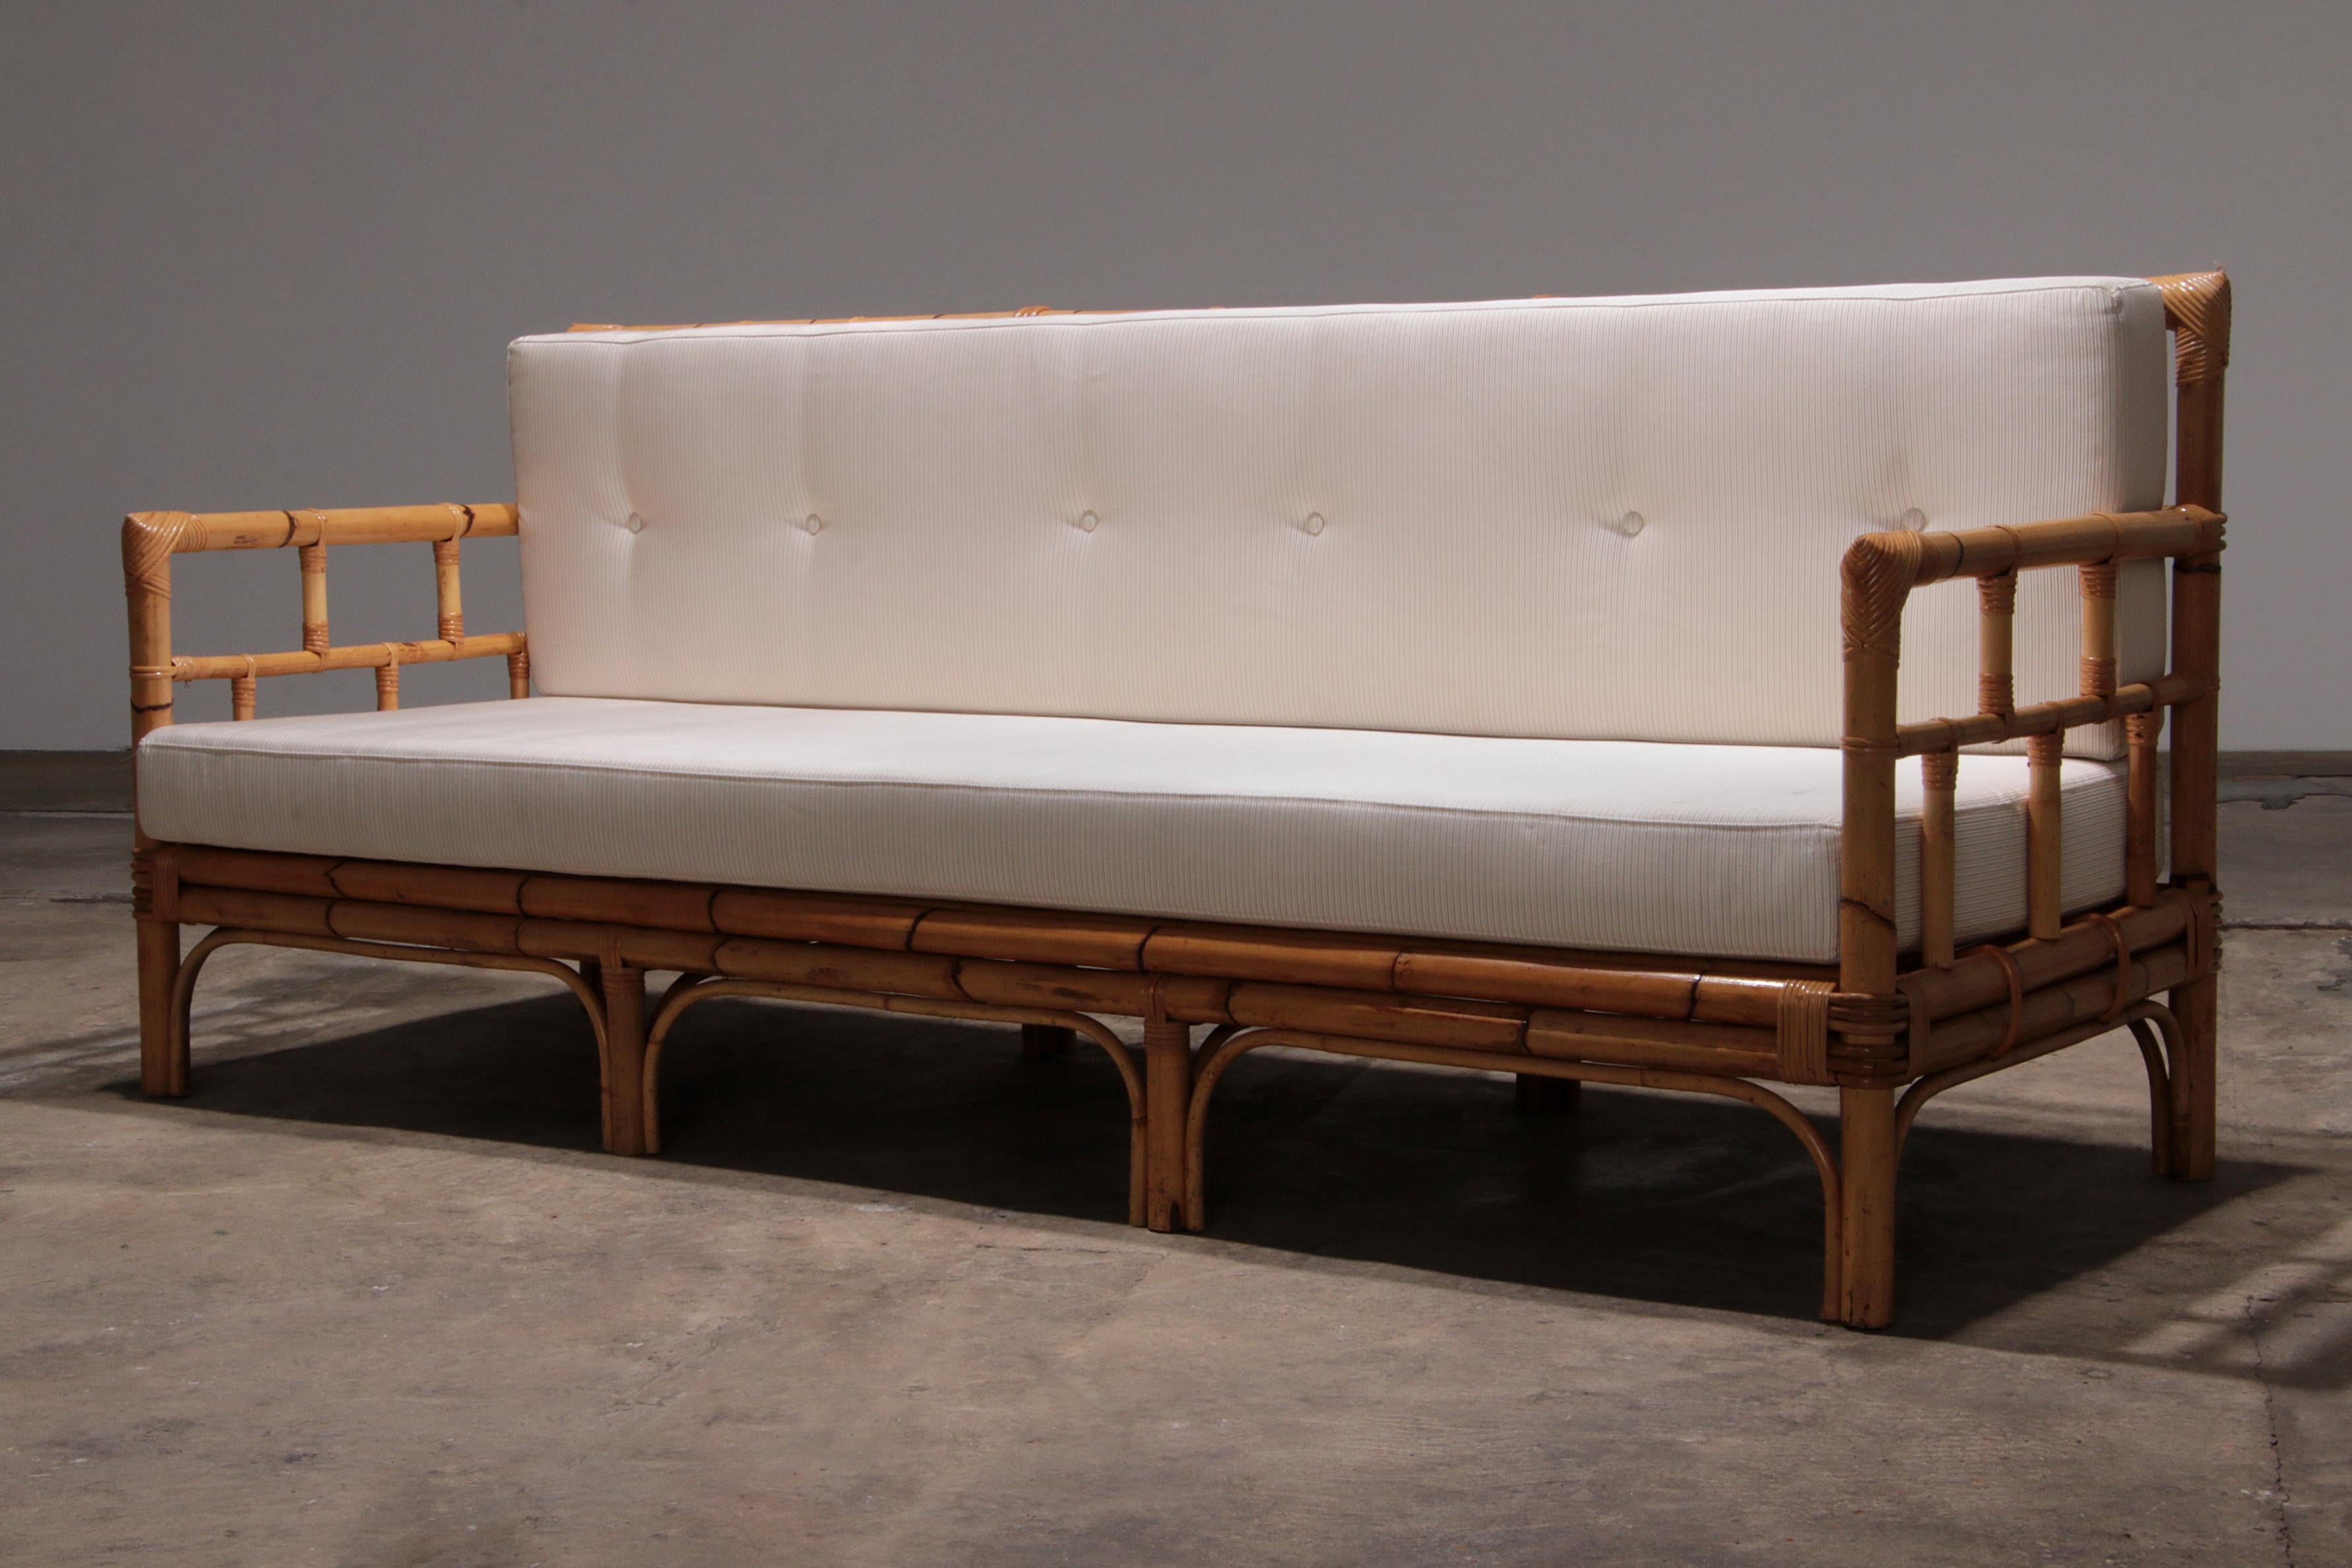 Vintage Italian Bamboo Sofa with Cushions from the 1970s For Sale 5